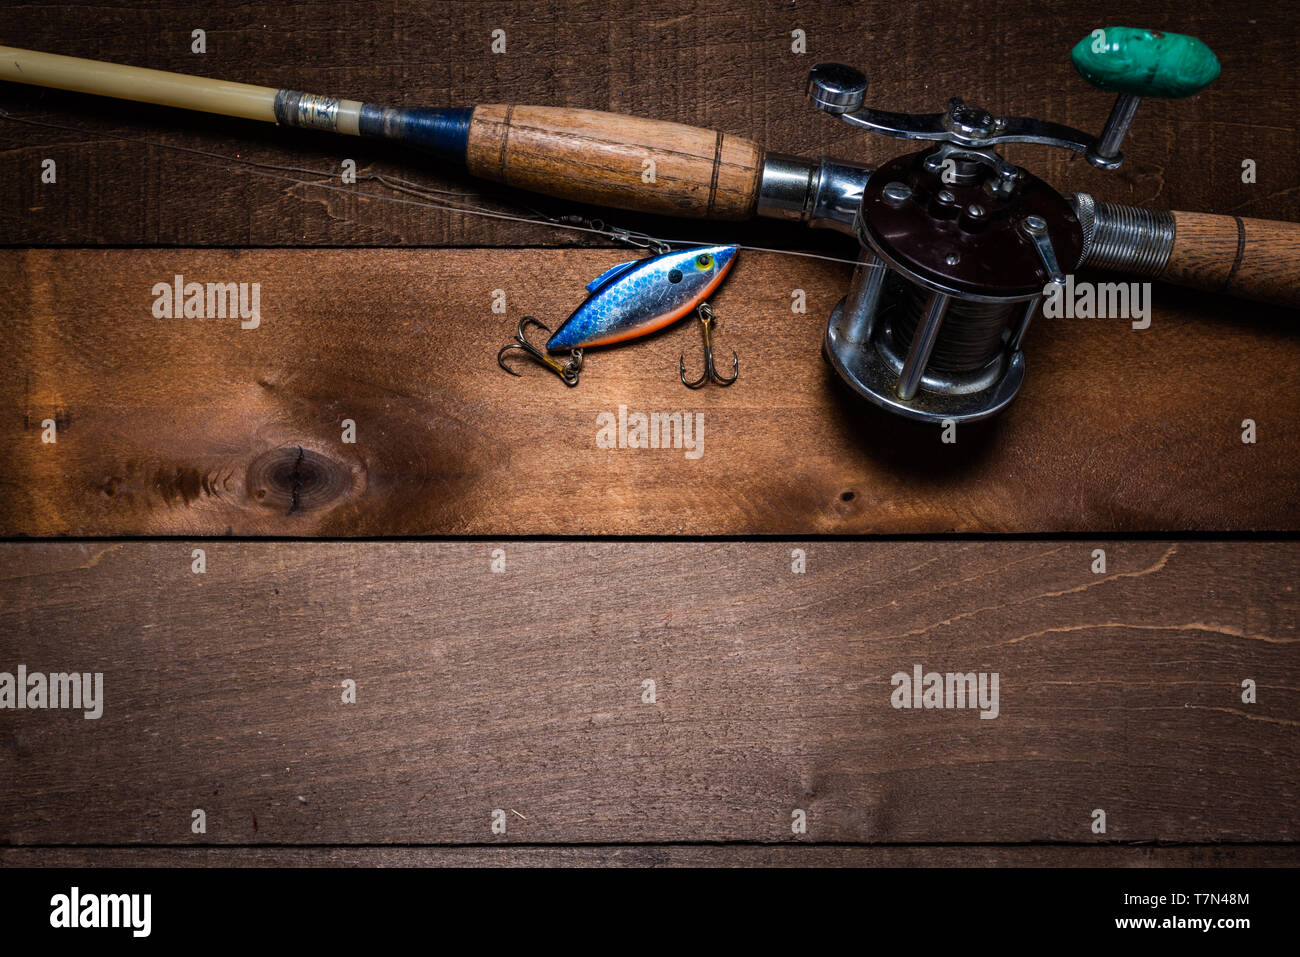 A vintage fishing rod and reel, with a lure on a wooden plank